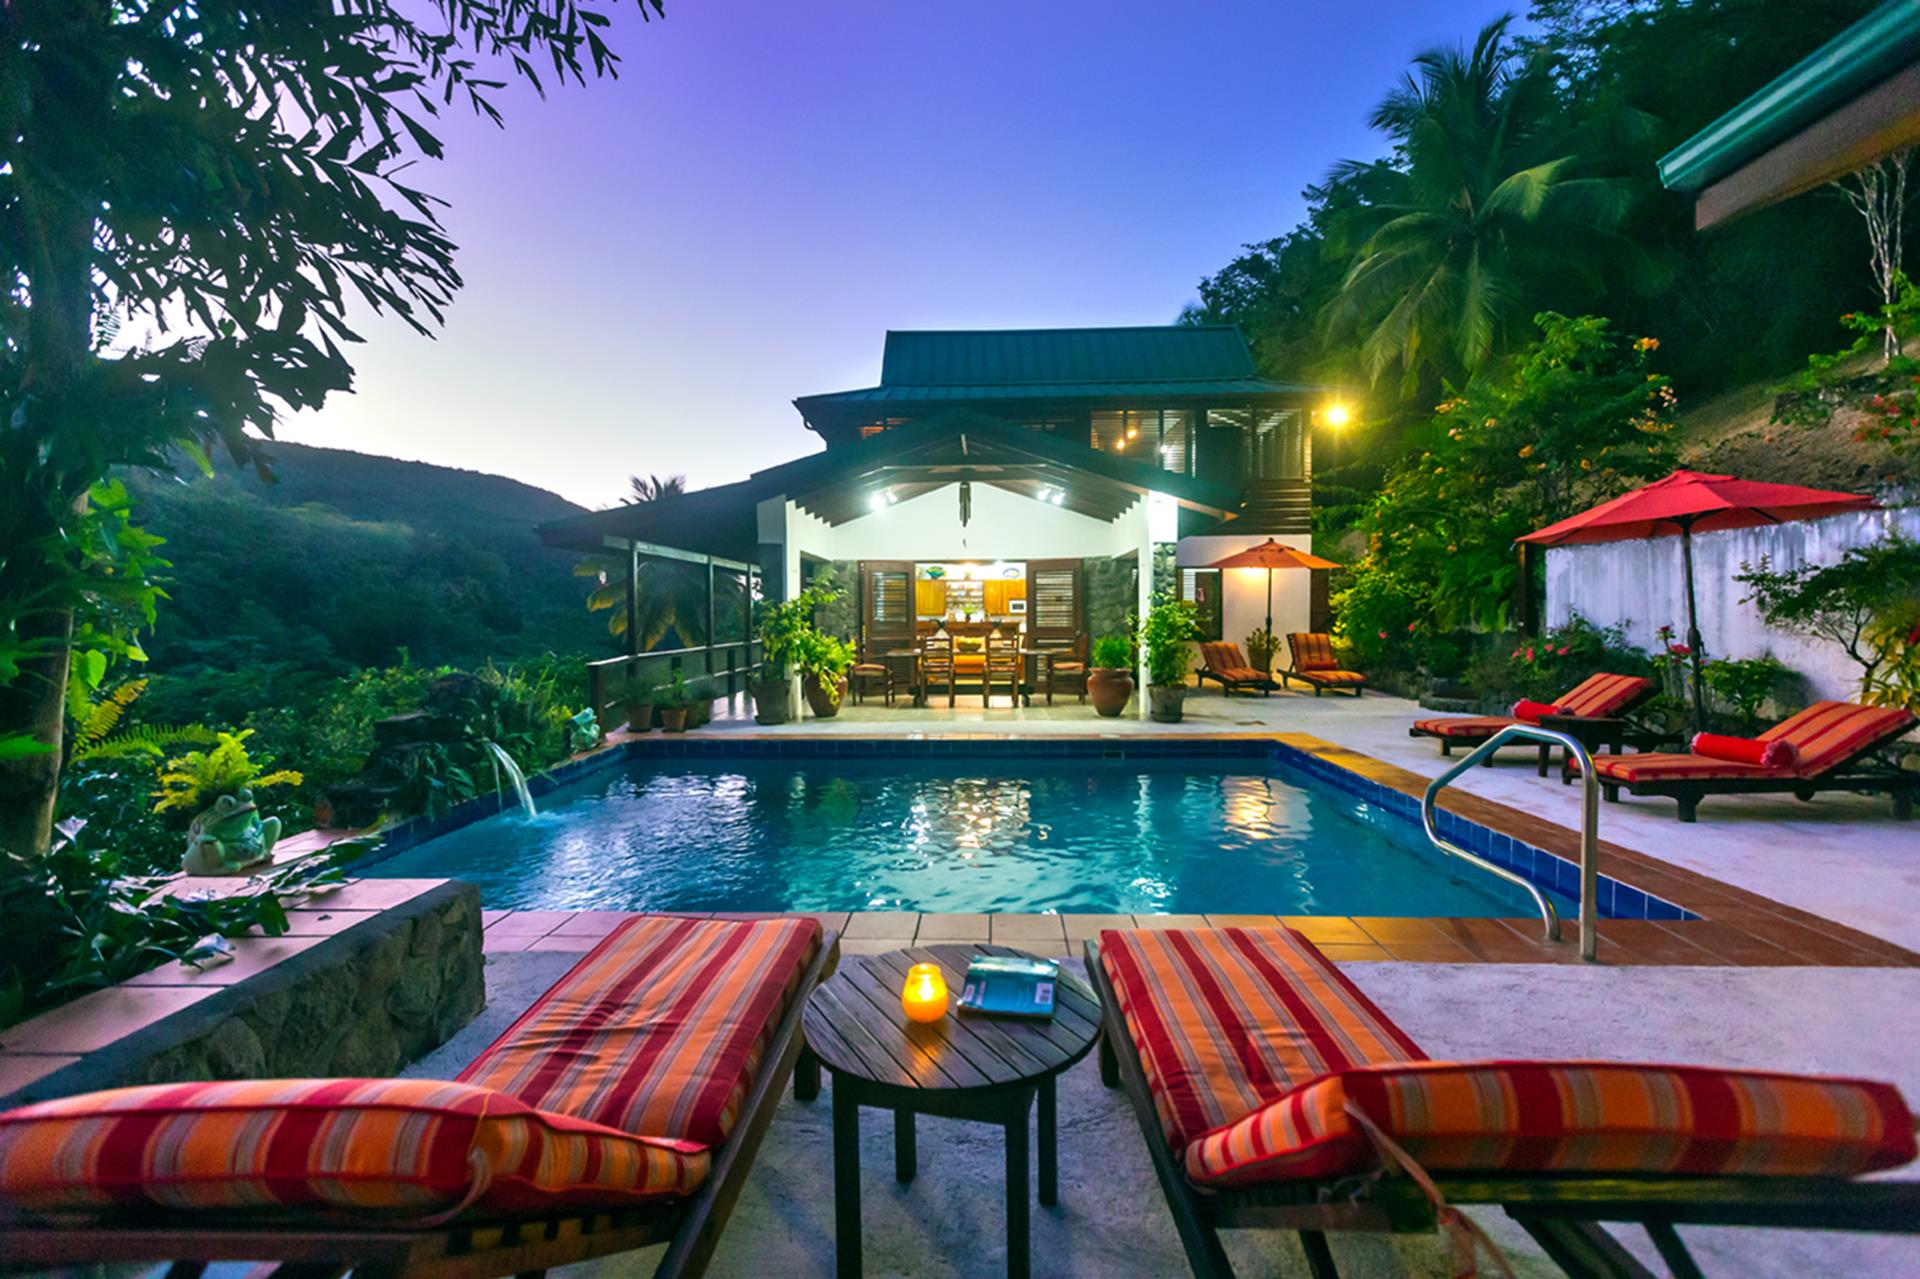 Escape the British winter - and head to St Lucia where this luxury villa is for sale